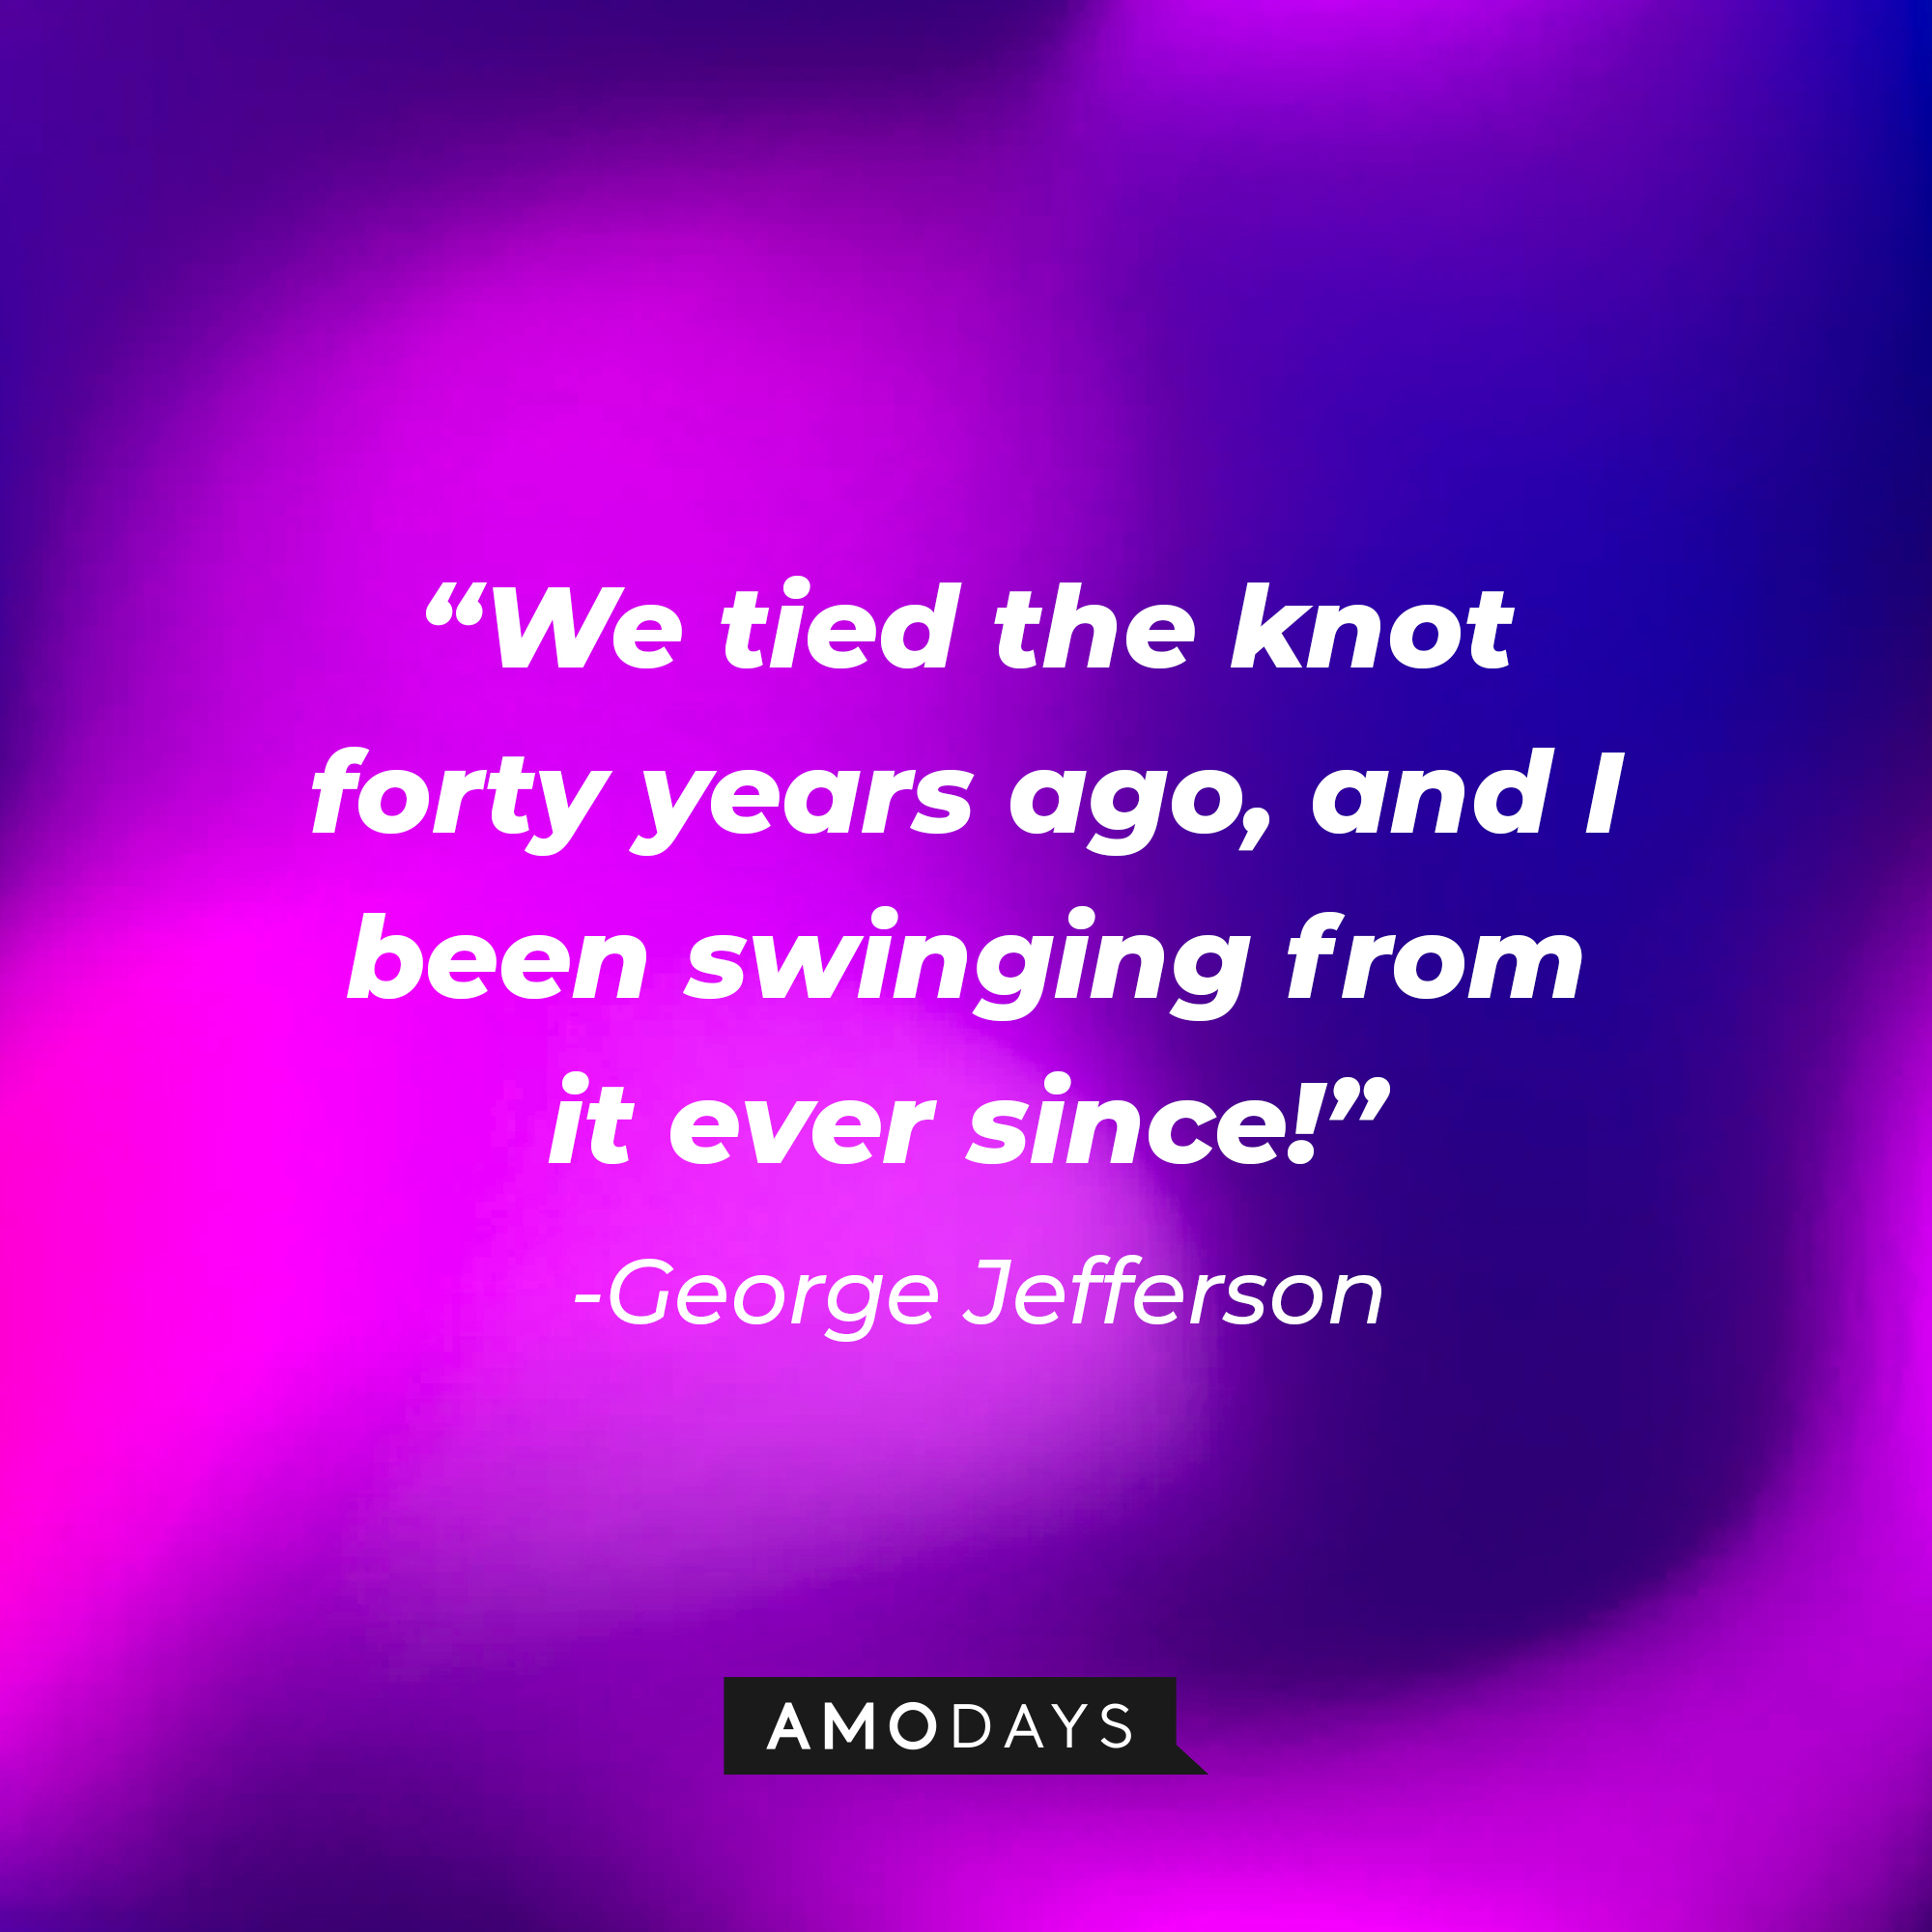 George Jefferson’s quote: “We tied the knot forty years ago, and I been swinging from it ever since!” | Source: AmoDays